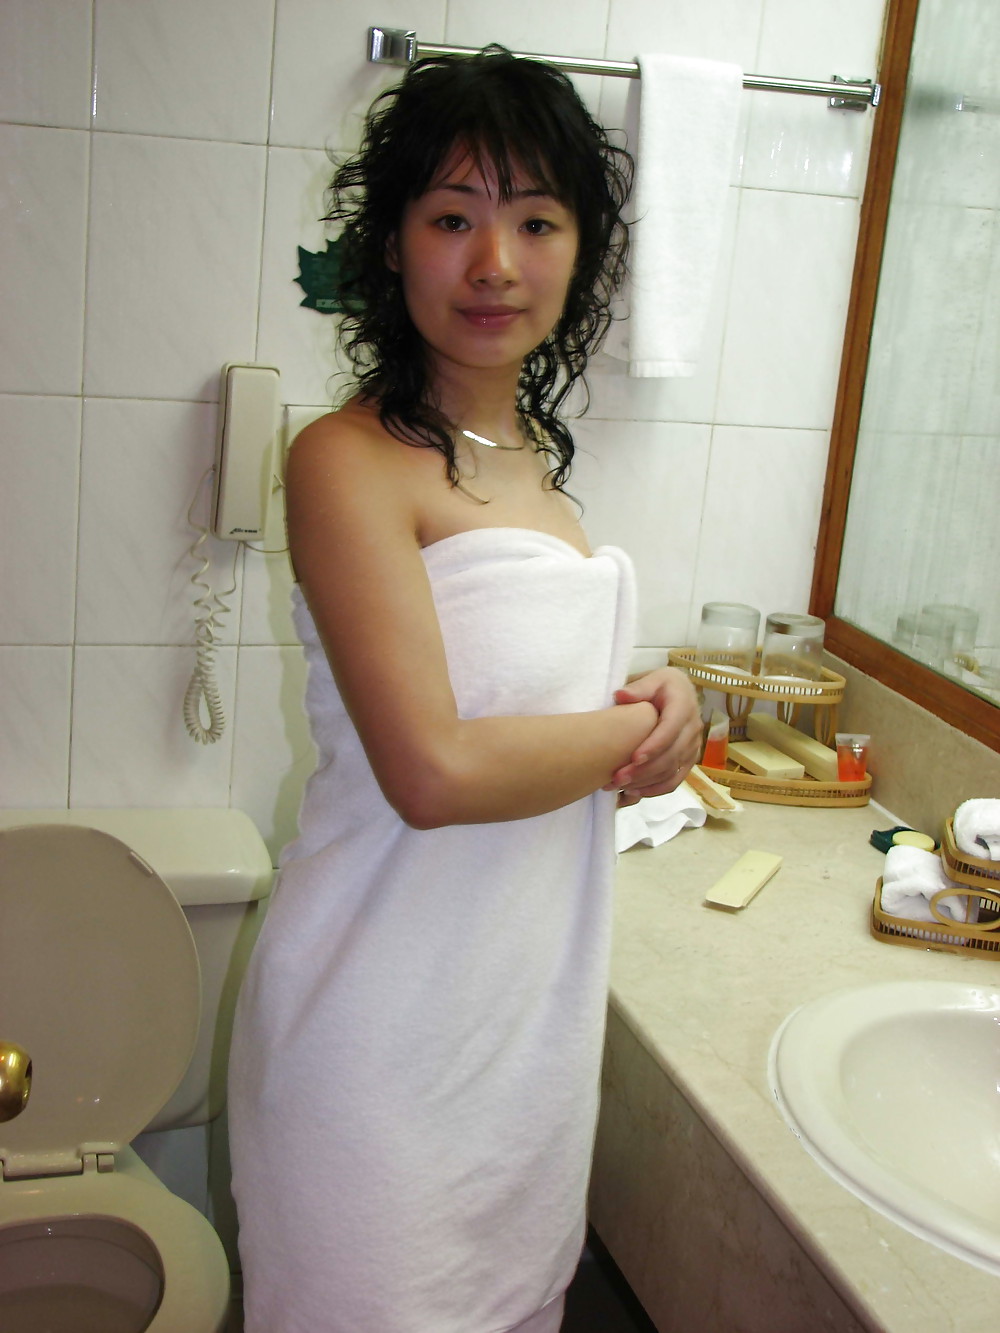 Chinese housewife with bushy armpits #20326412